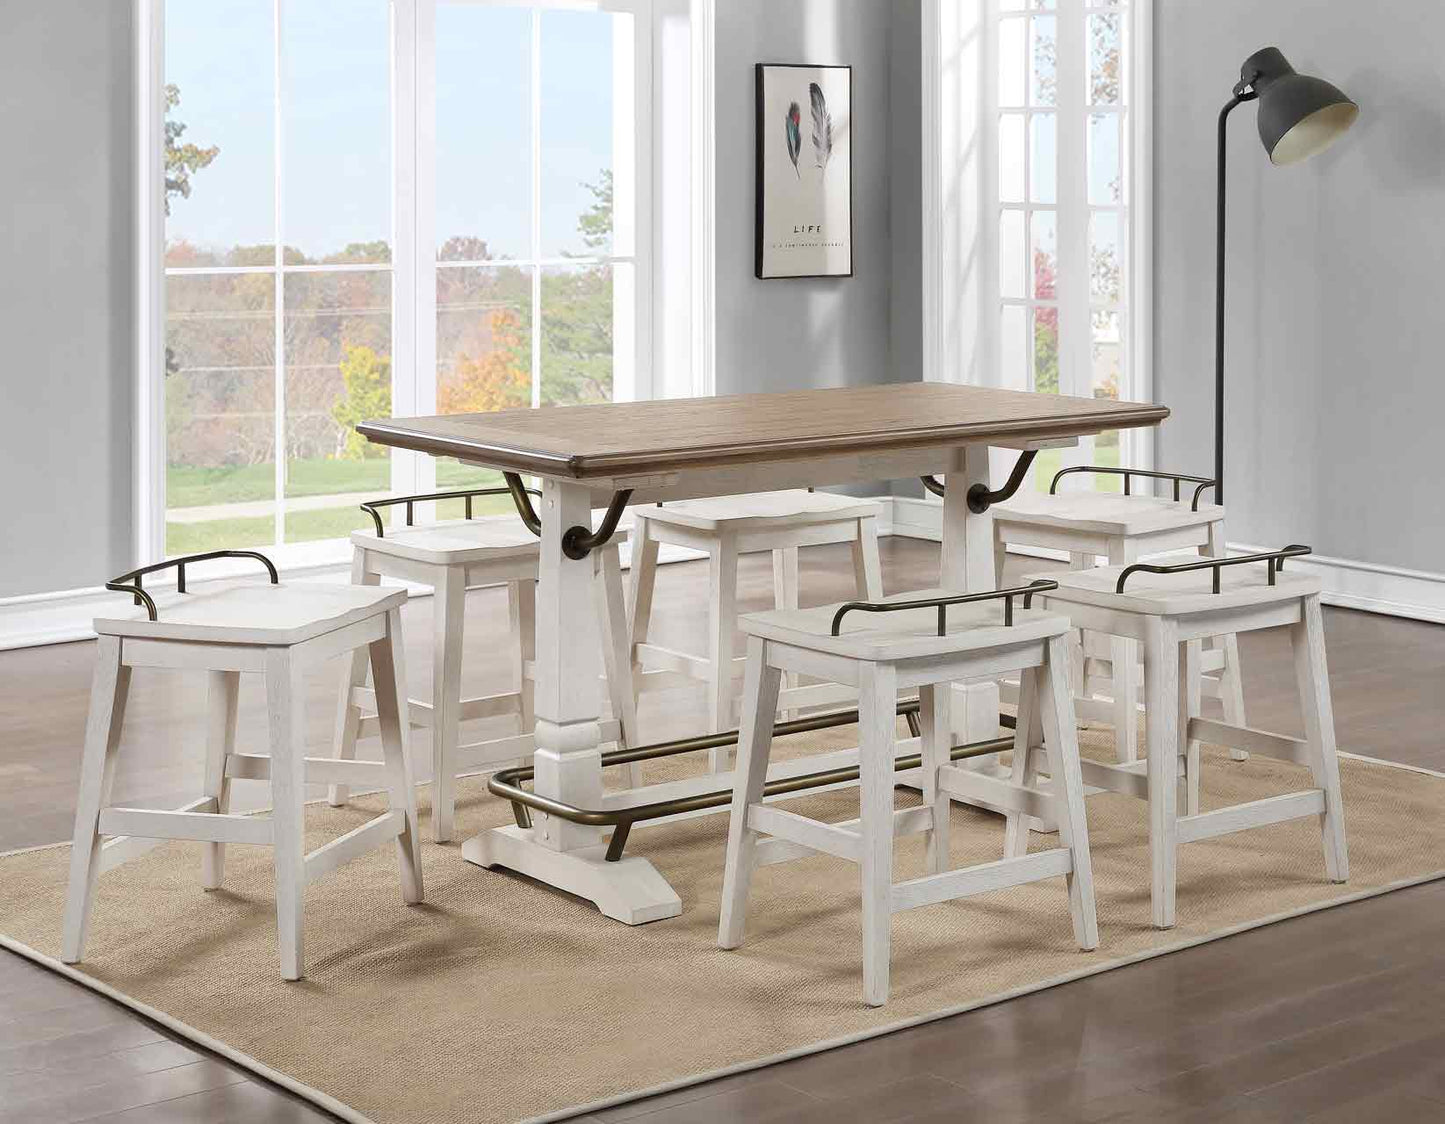 Pendleton 5-Piece Counter Dining Set
(Counter Table & 4 Counter Stools)